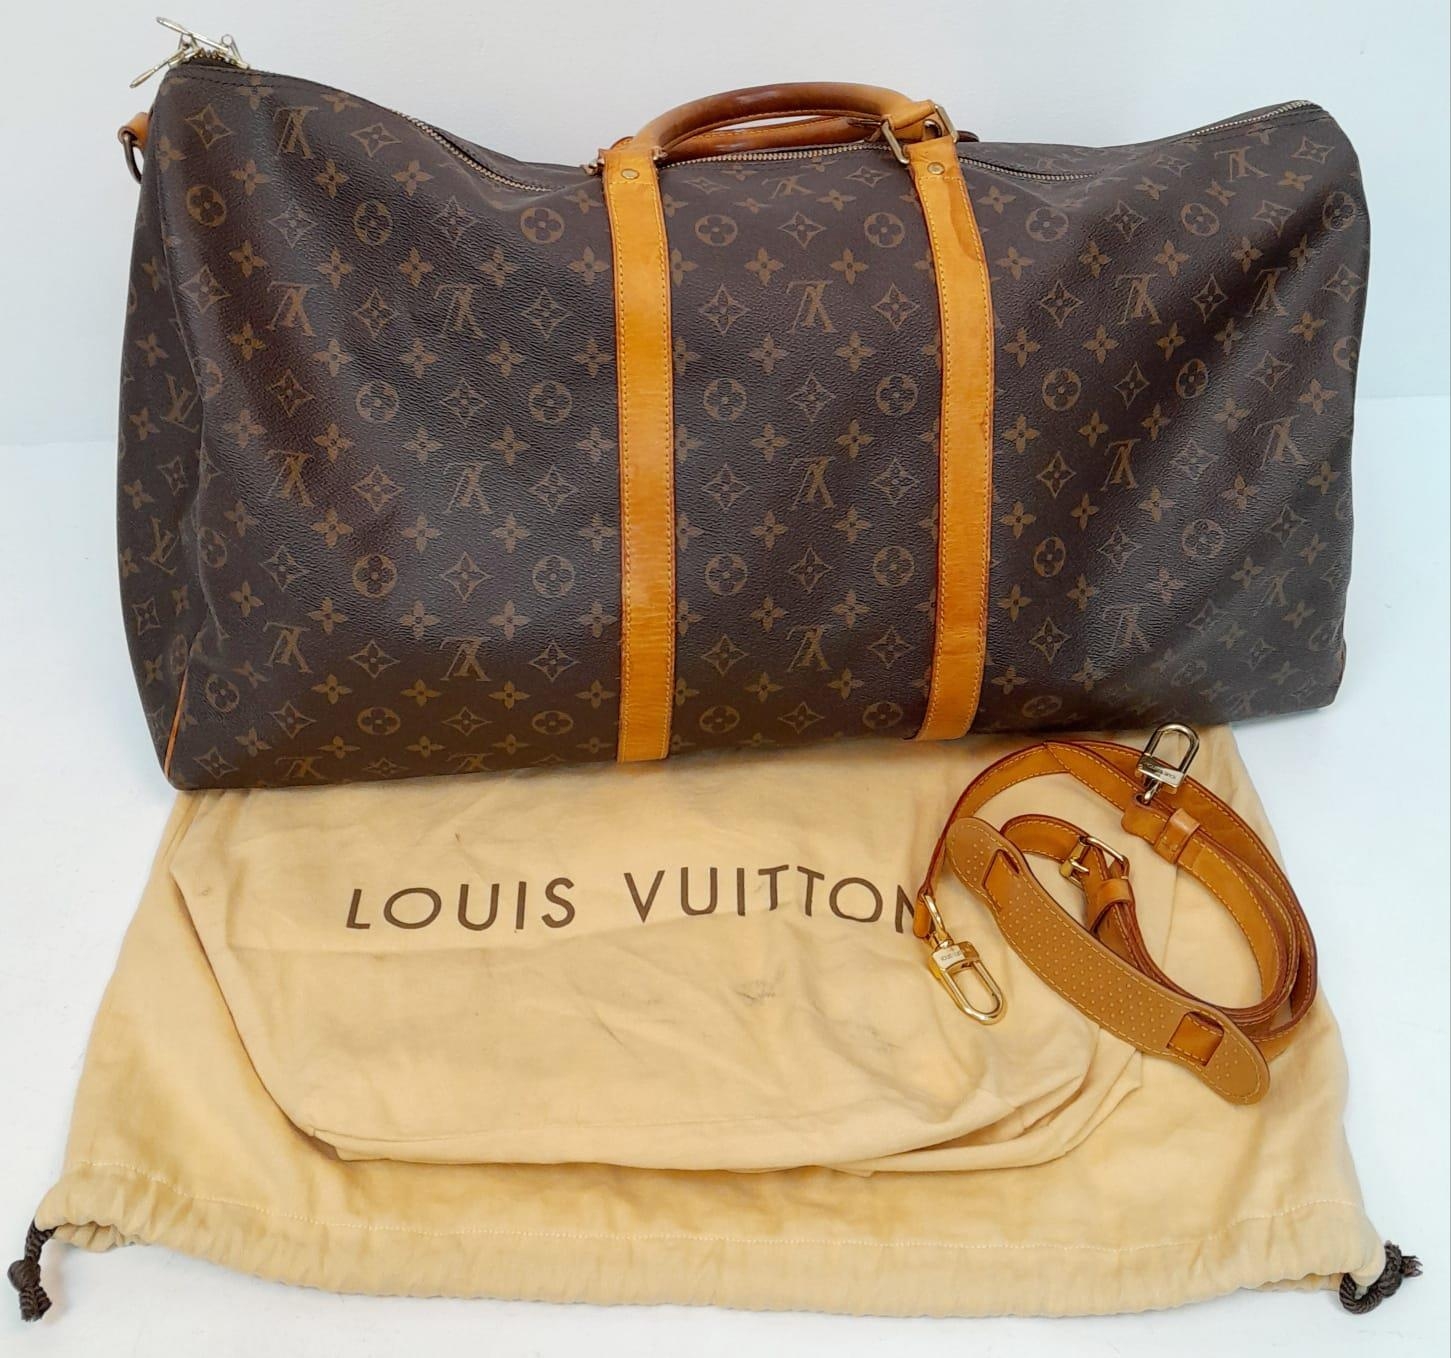 A Large Louis Vuitton Keepall Travel Bag. Monogram LV canvas exterior with cowhide leather handles - Image 6 of 8